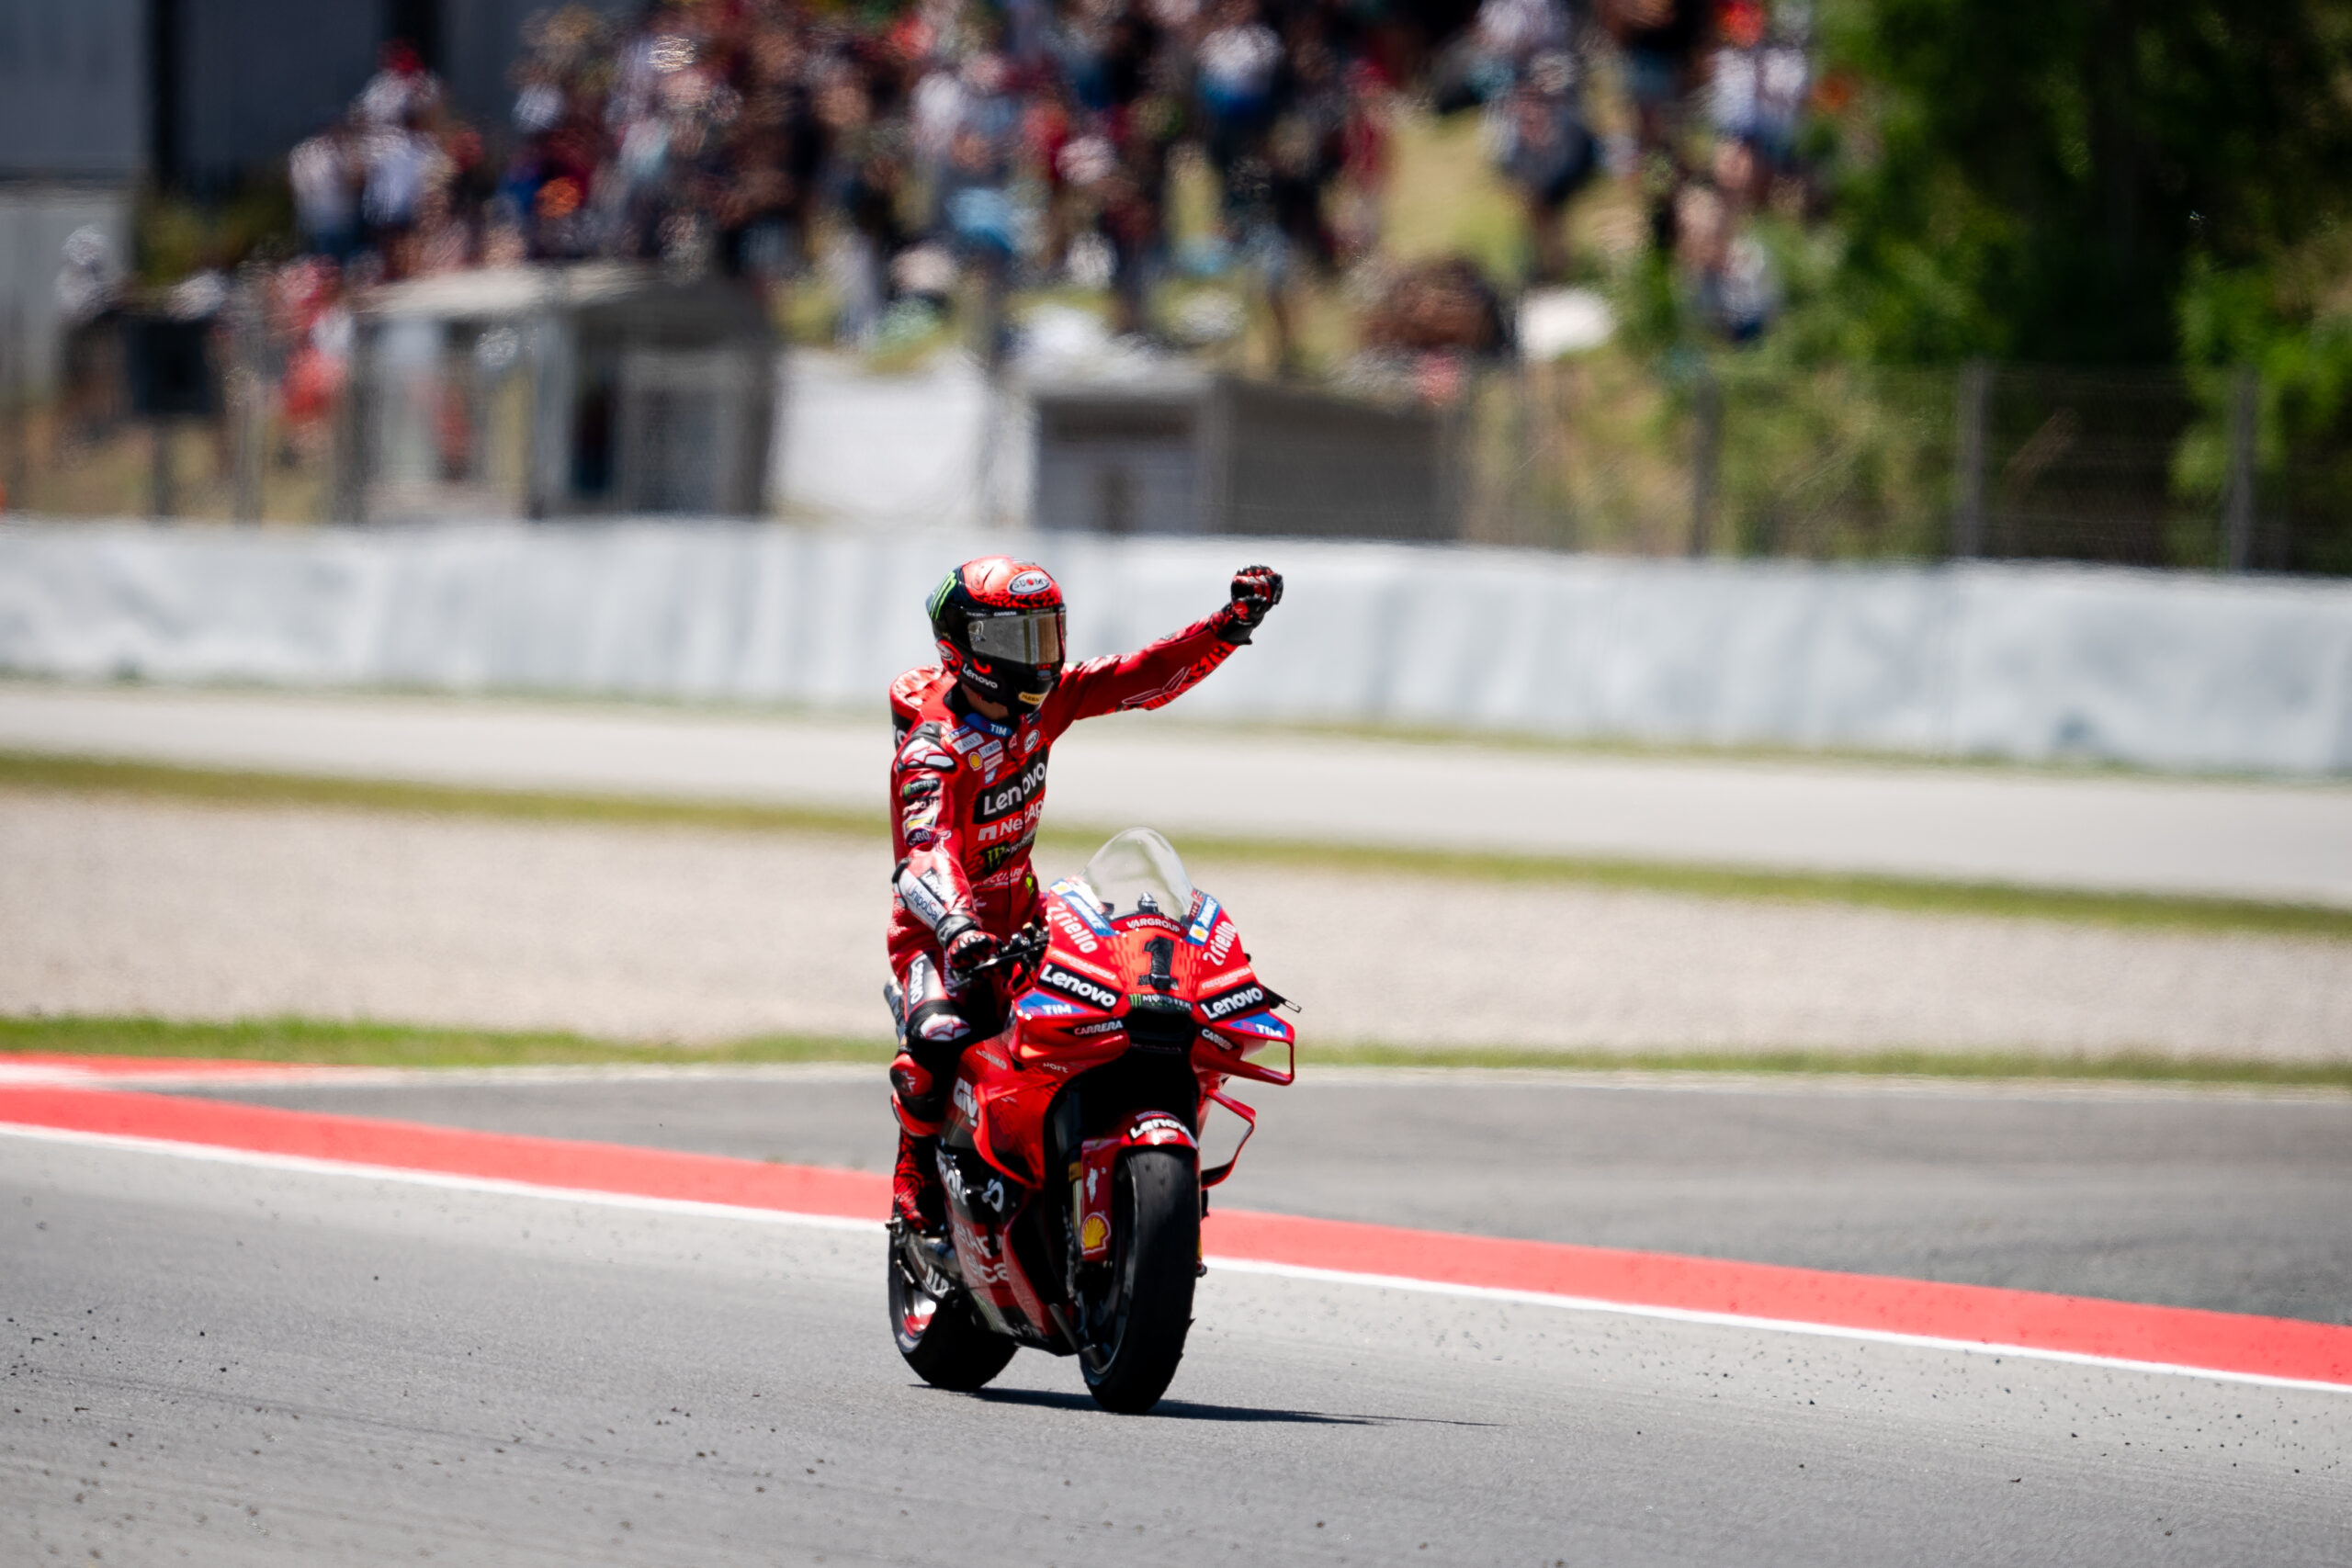 Featured image for “MotoGP: Francesco Bagnaia Takes his First Victory at the Circuit de Catalunya”